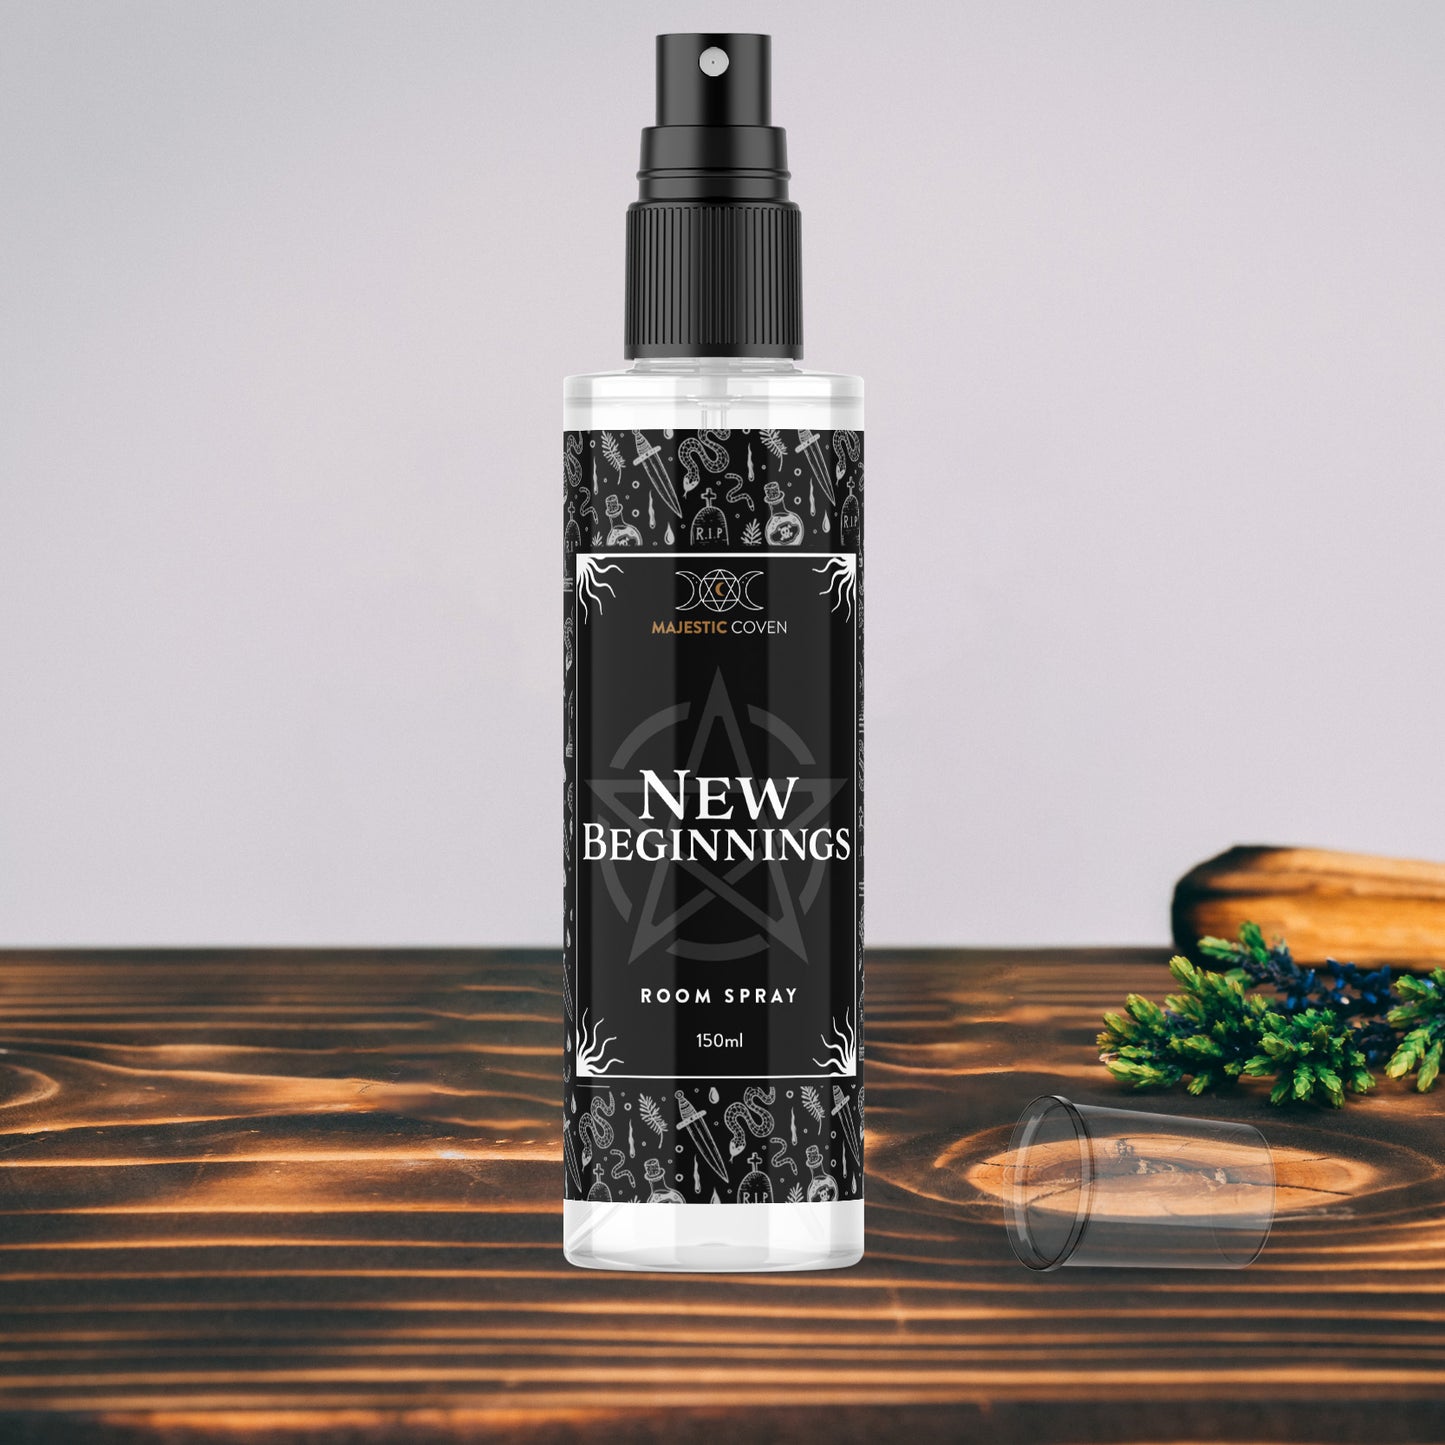 New Beginnings - Room Spray Majestic Coven